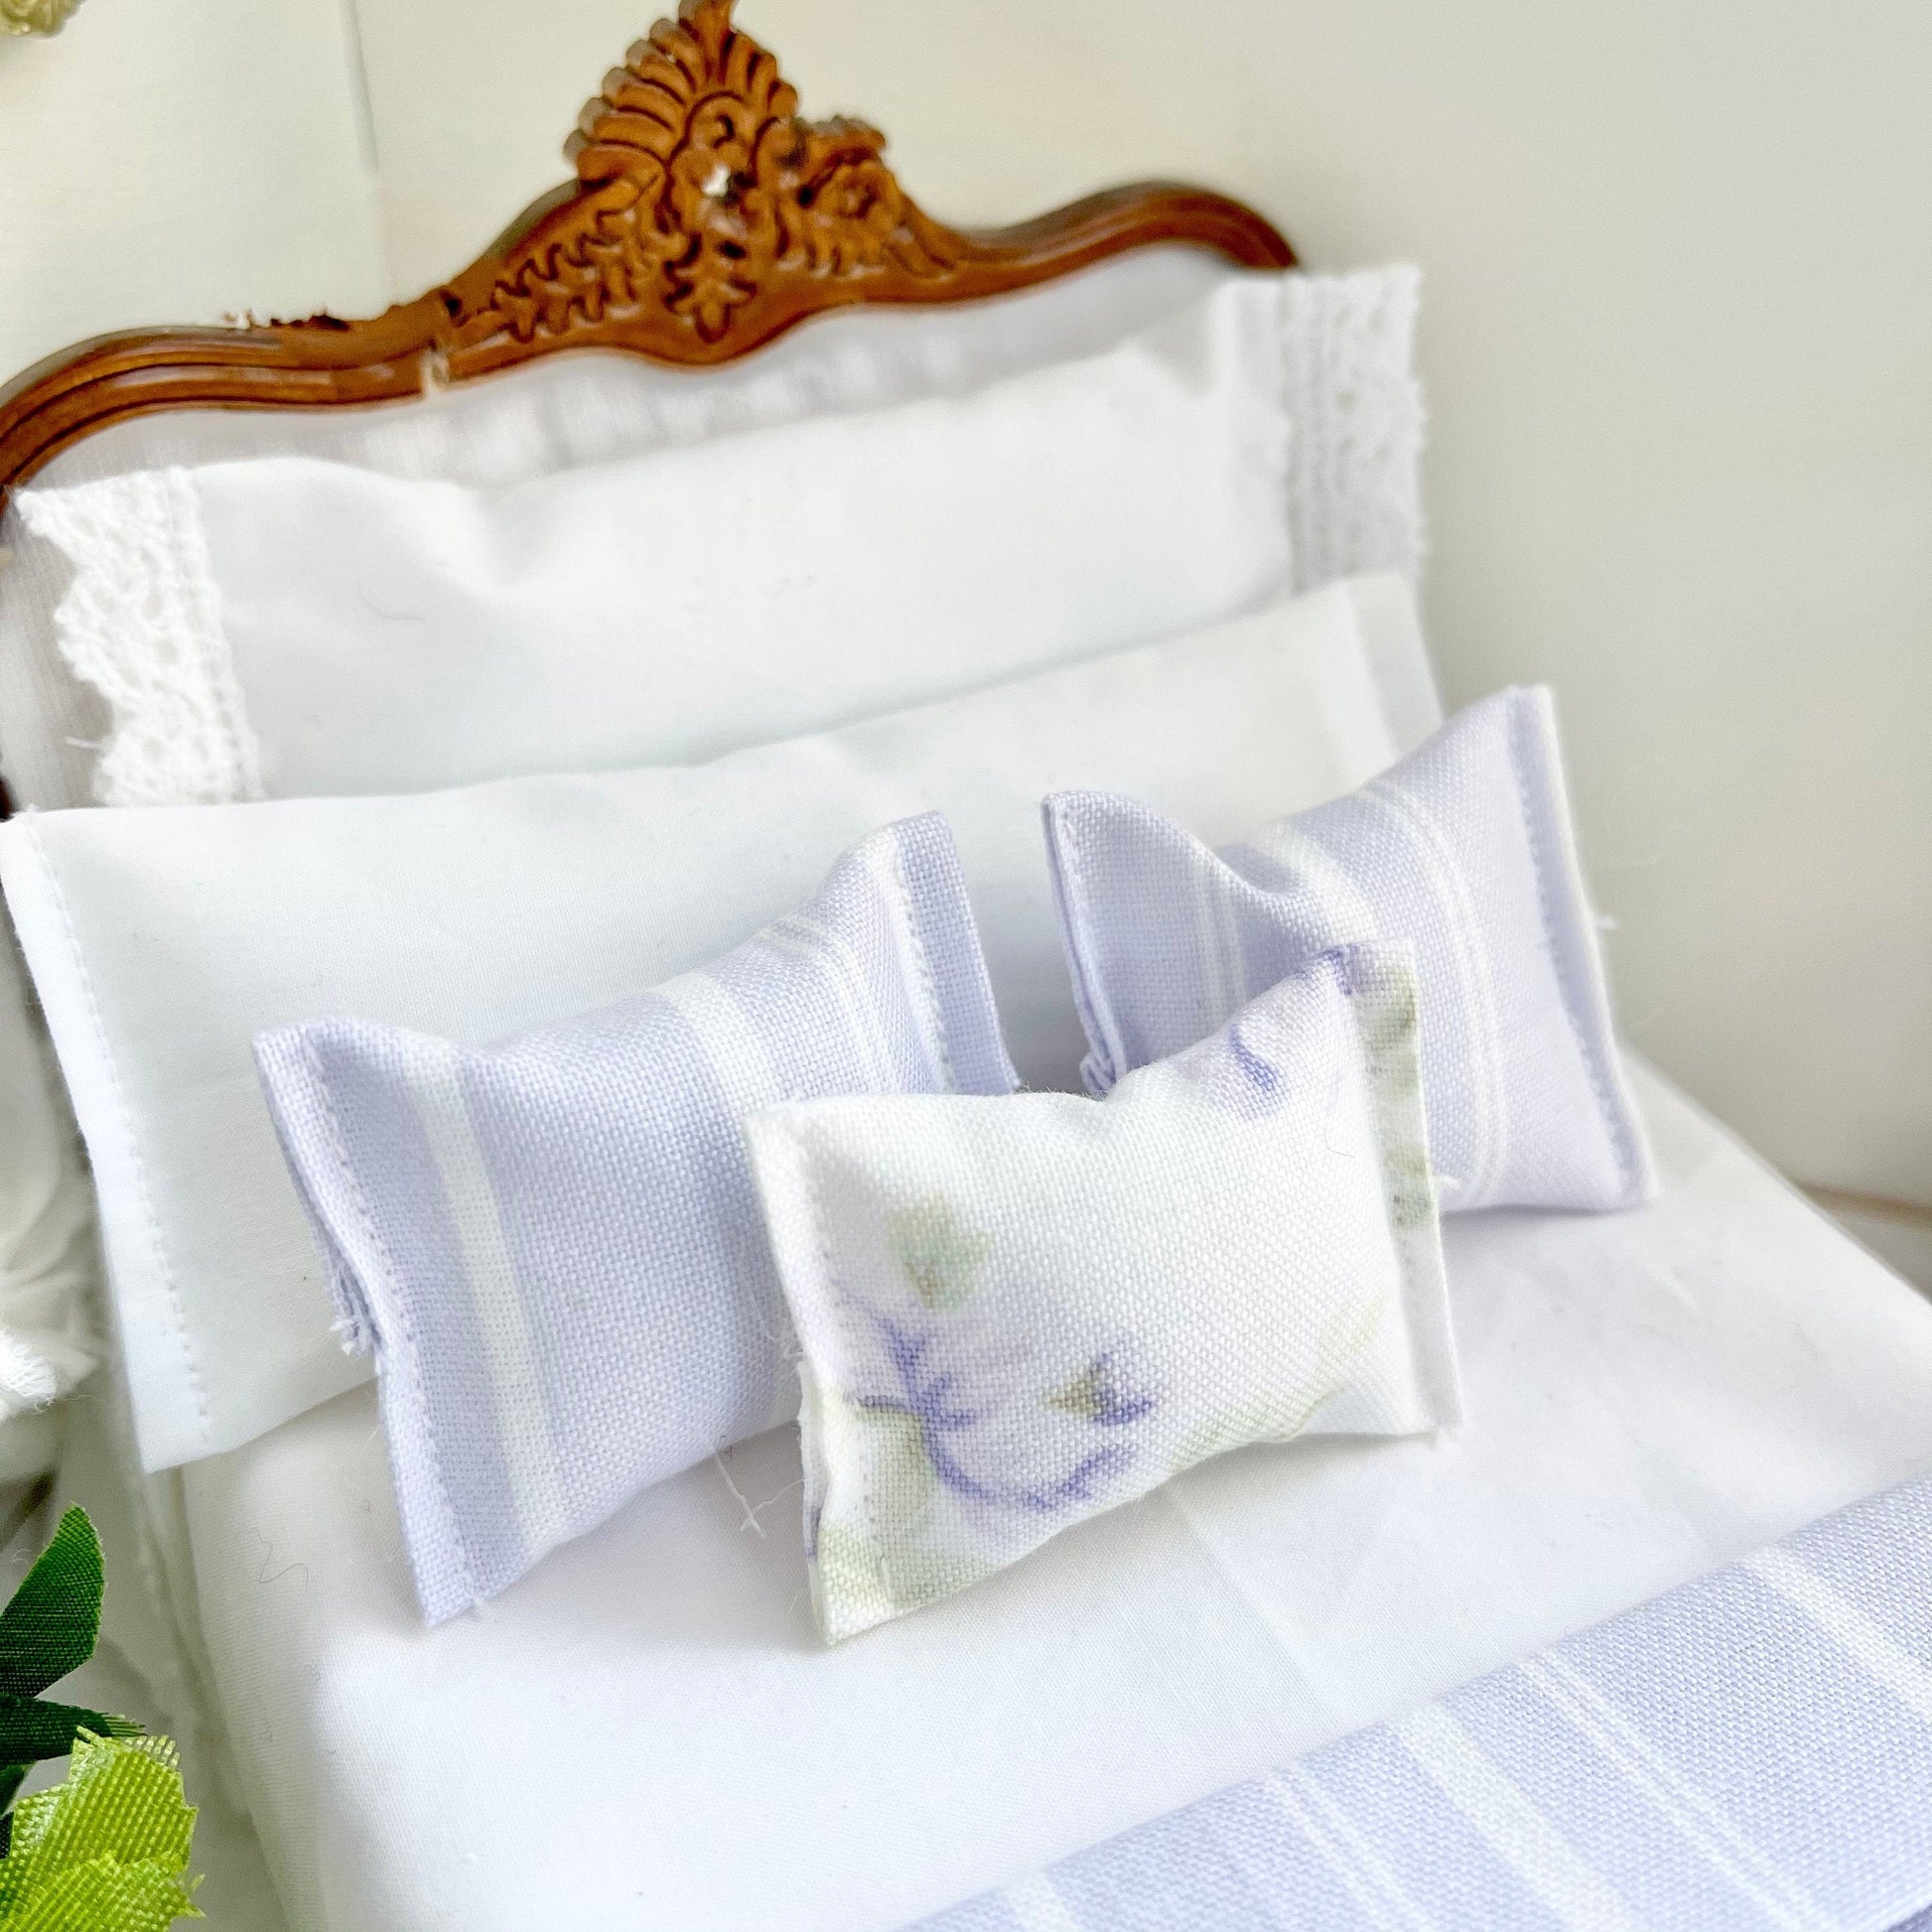 Chantallena Doll House Shabby Cottage - Eight Piece Shabby White Cotton Bedding Set with Lavender Striped Bed Runner